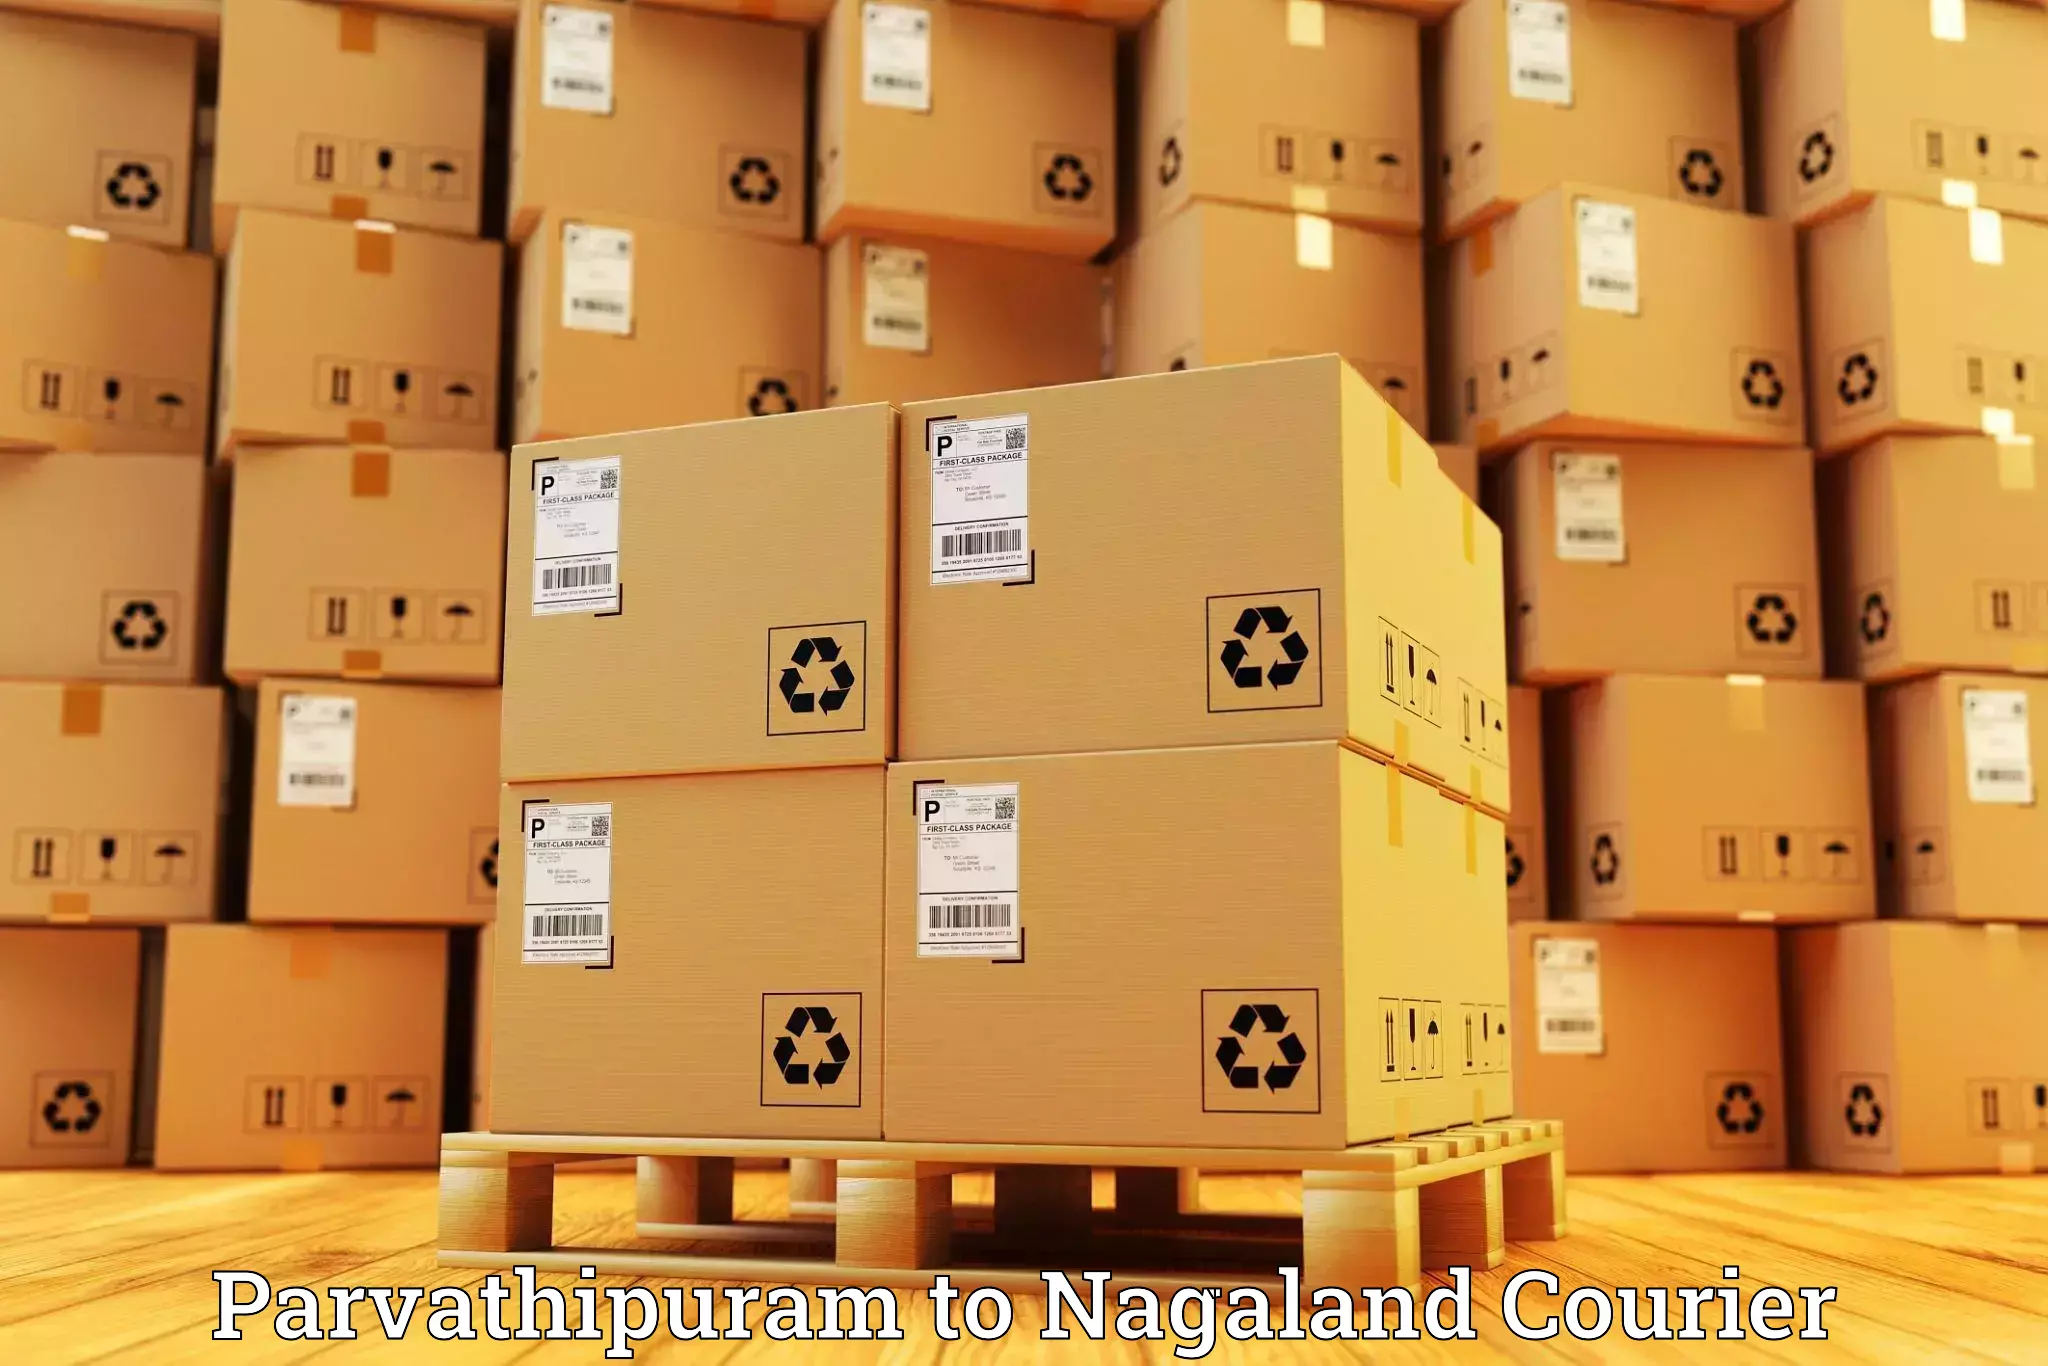 Global shipping solutions Parvathipuram to Nagaland